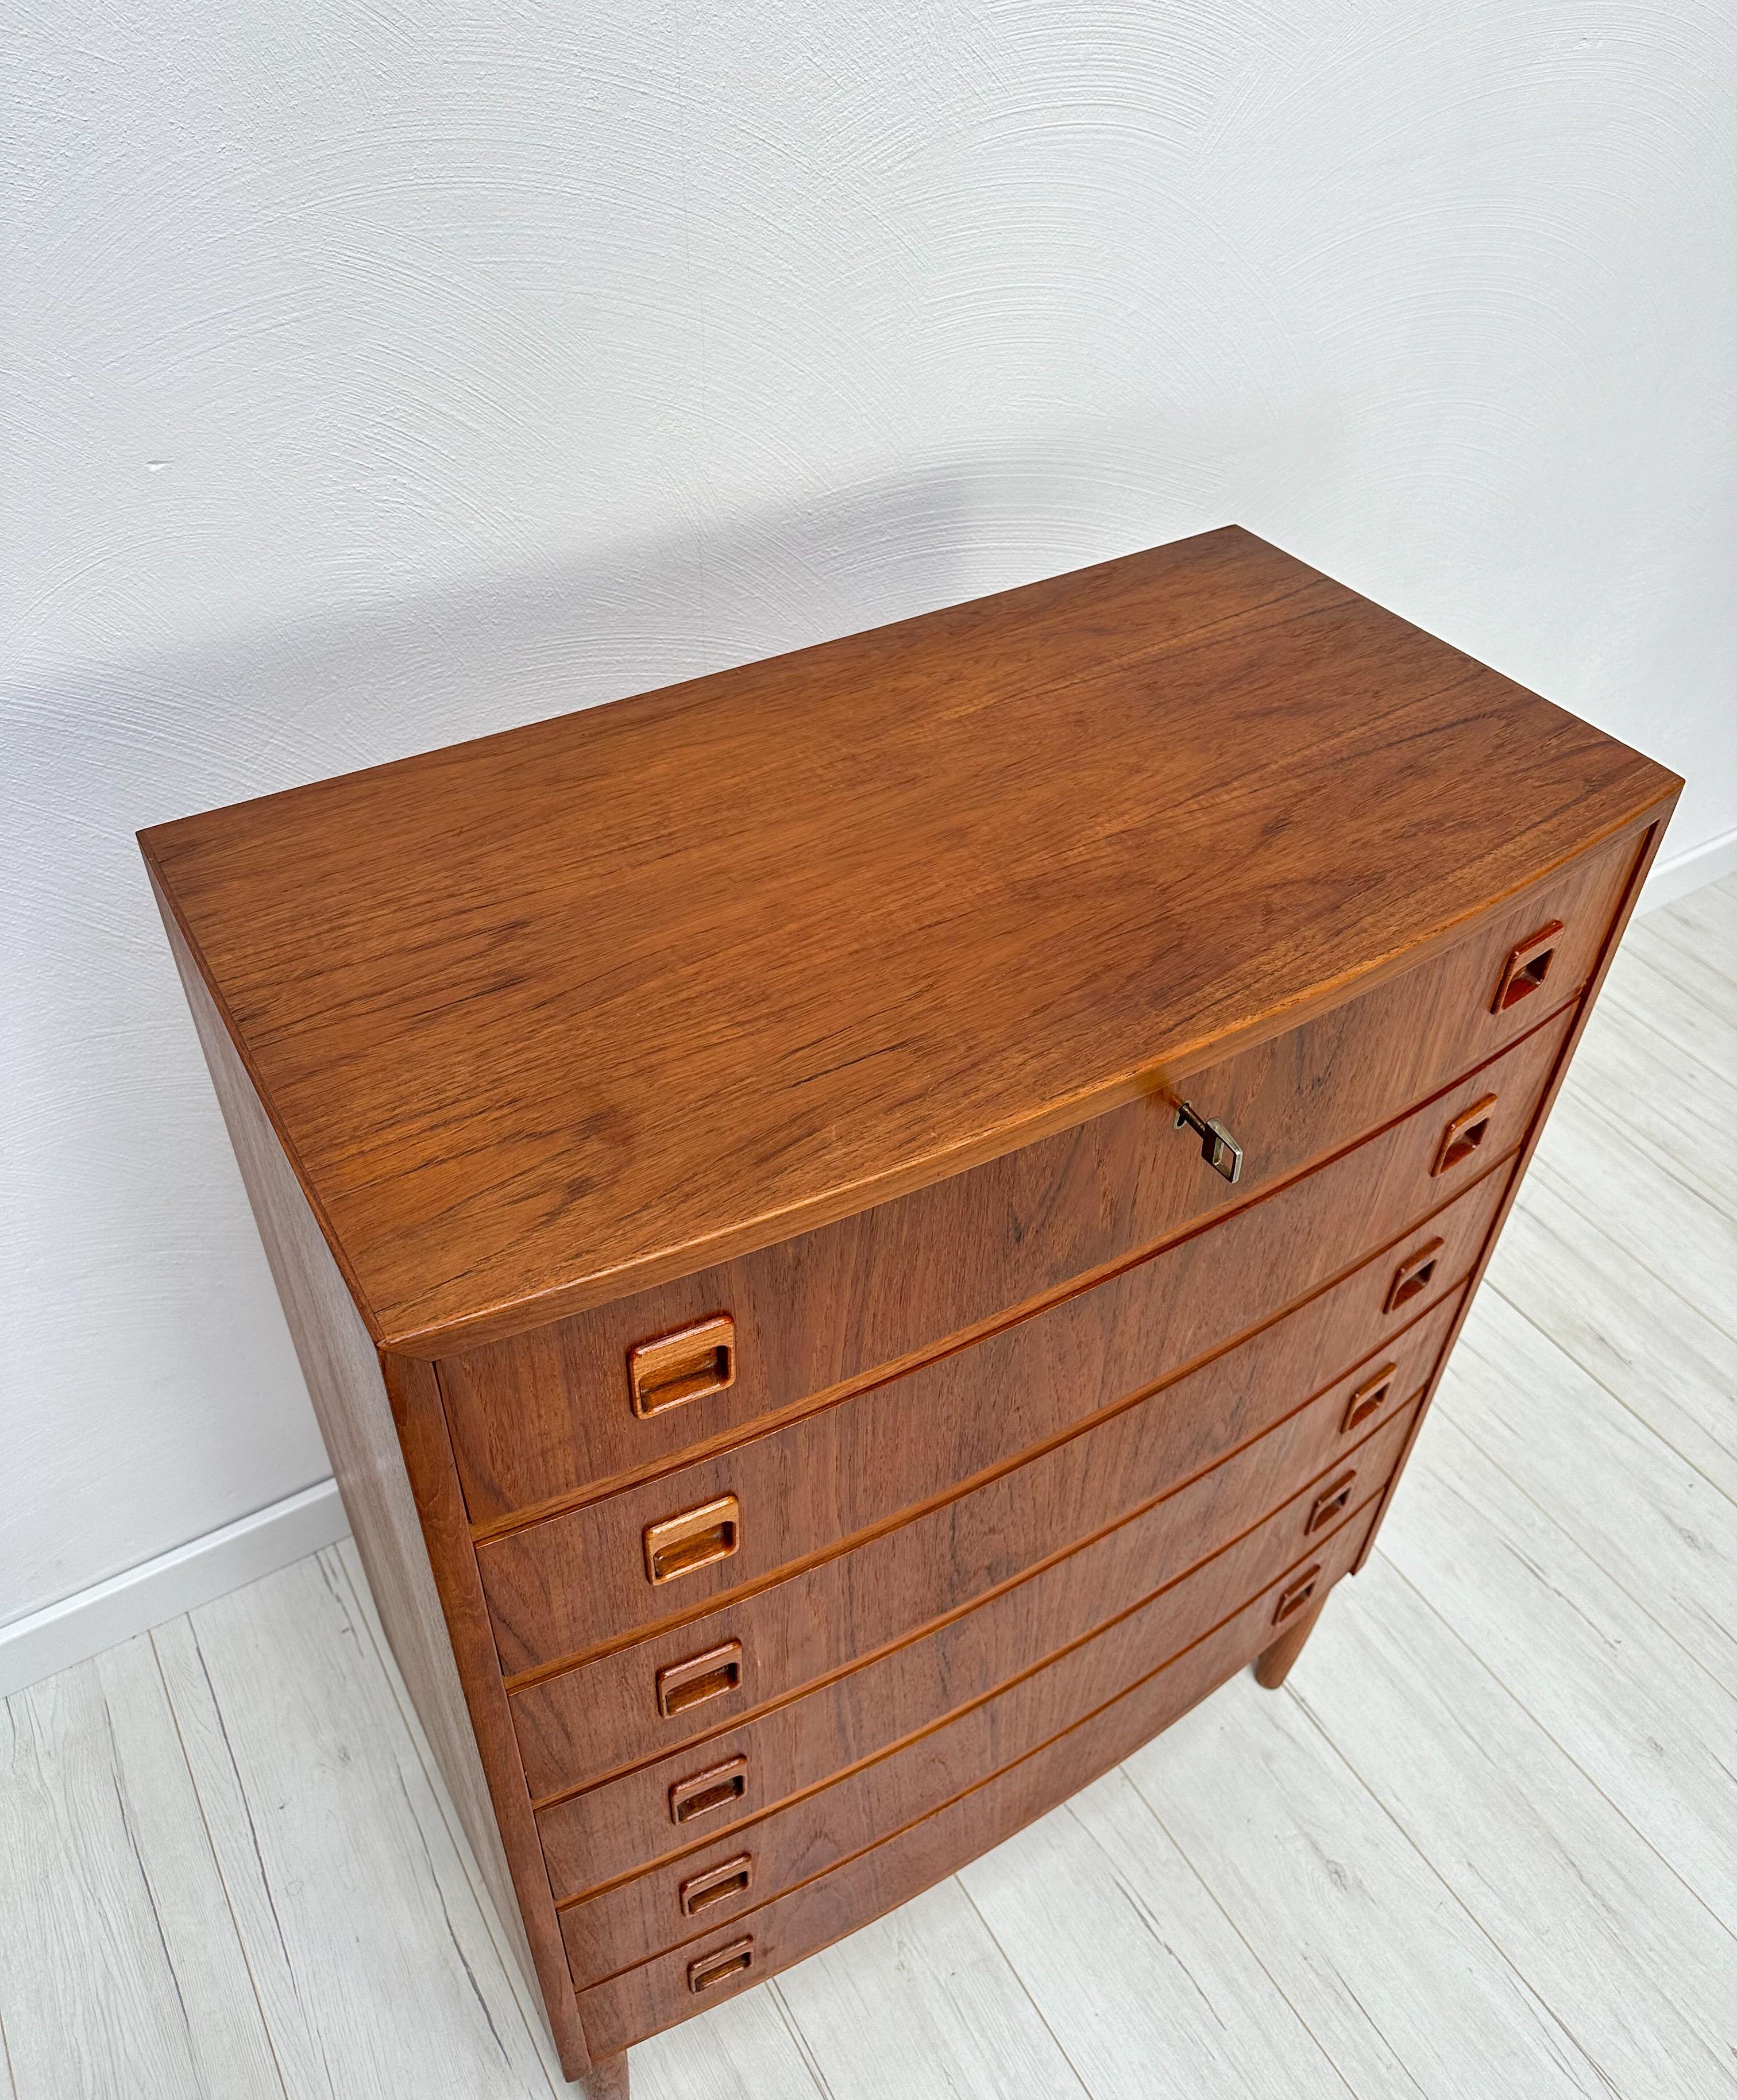 Vintage Danish Bow Front Teak Chest of Drawers, 1960s For Sale 3